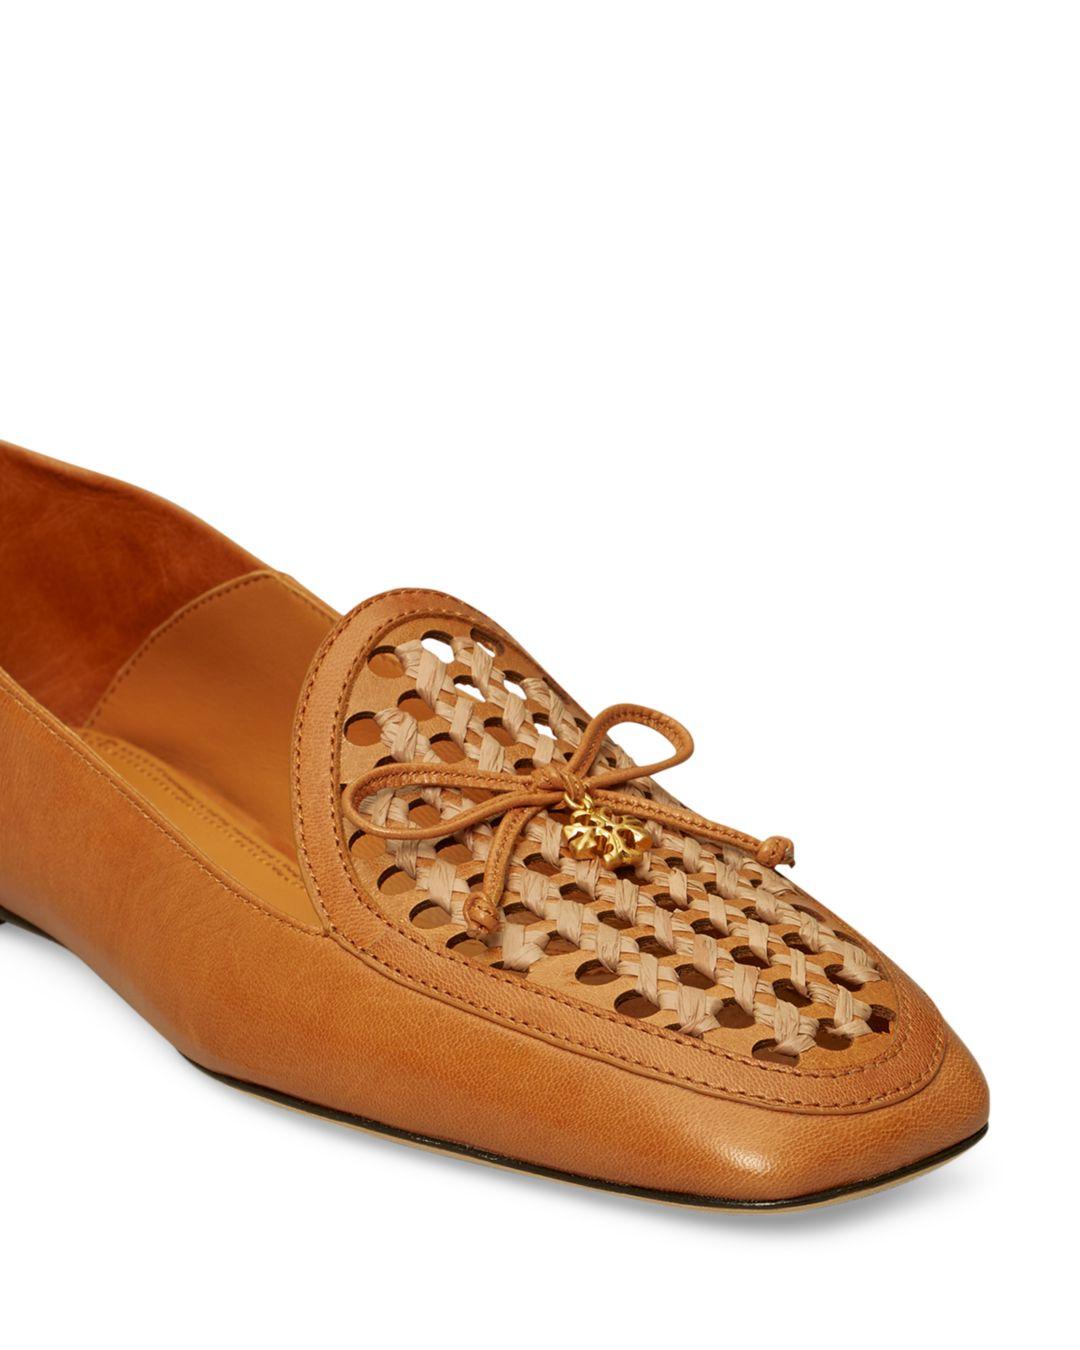 Tory Burch Charm Woven Loafer in Brown | Lyst